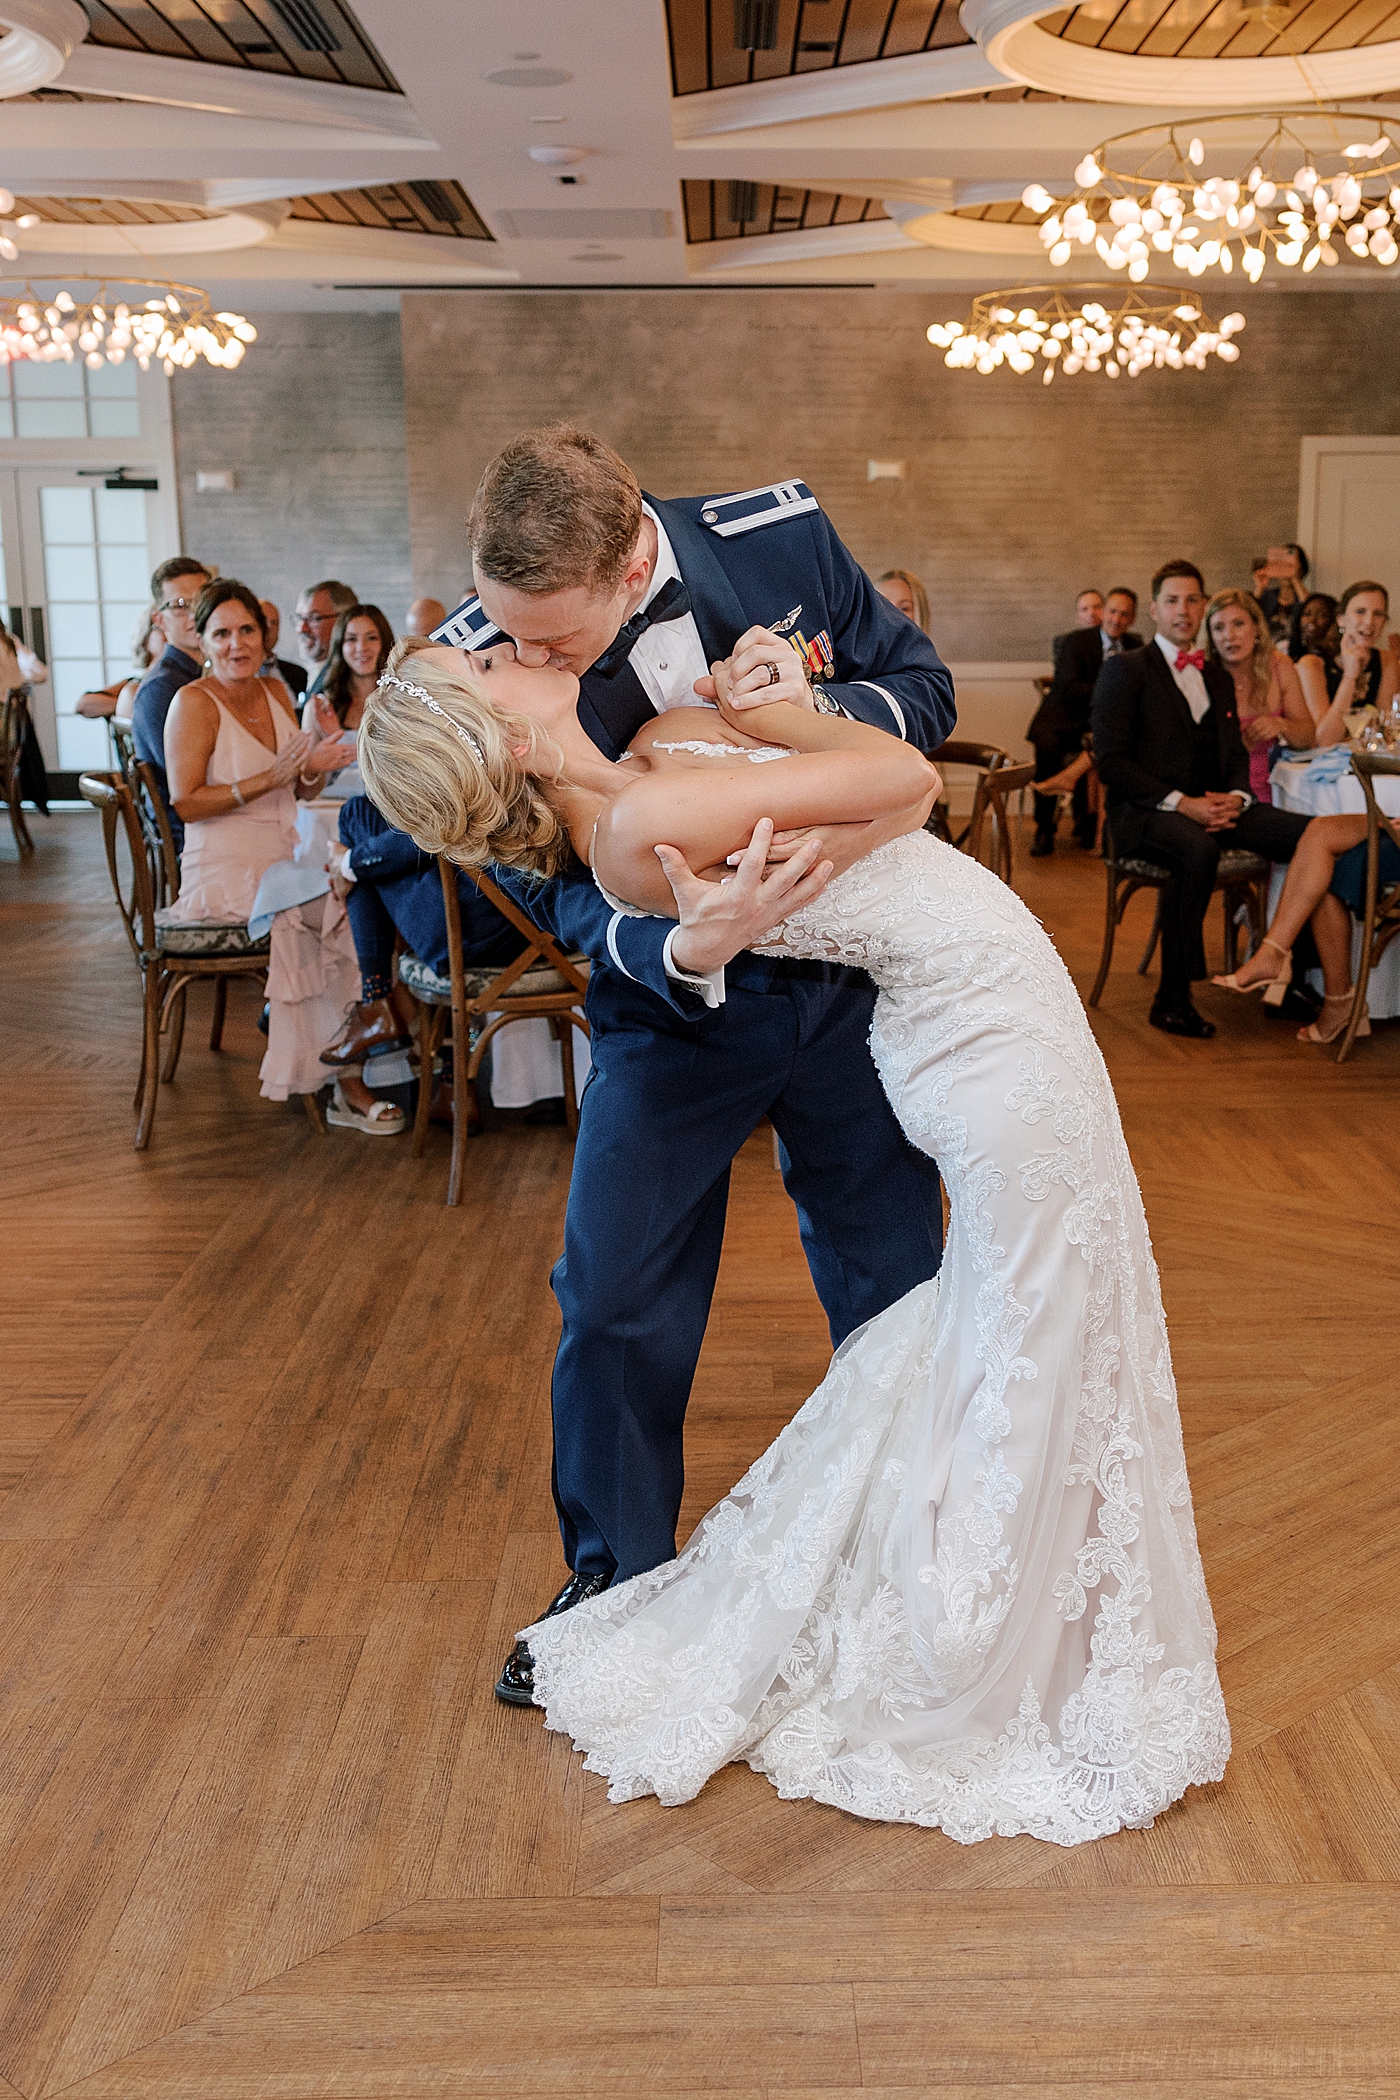 Bride and groom kiss during their first dance | Image by Hope Helmuth Photography